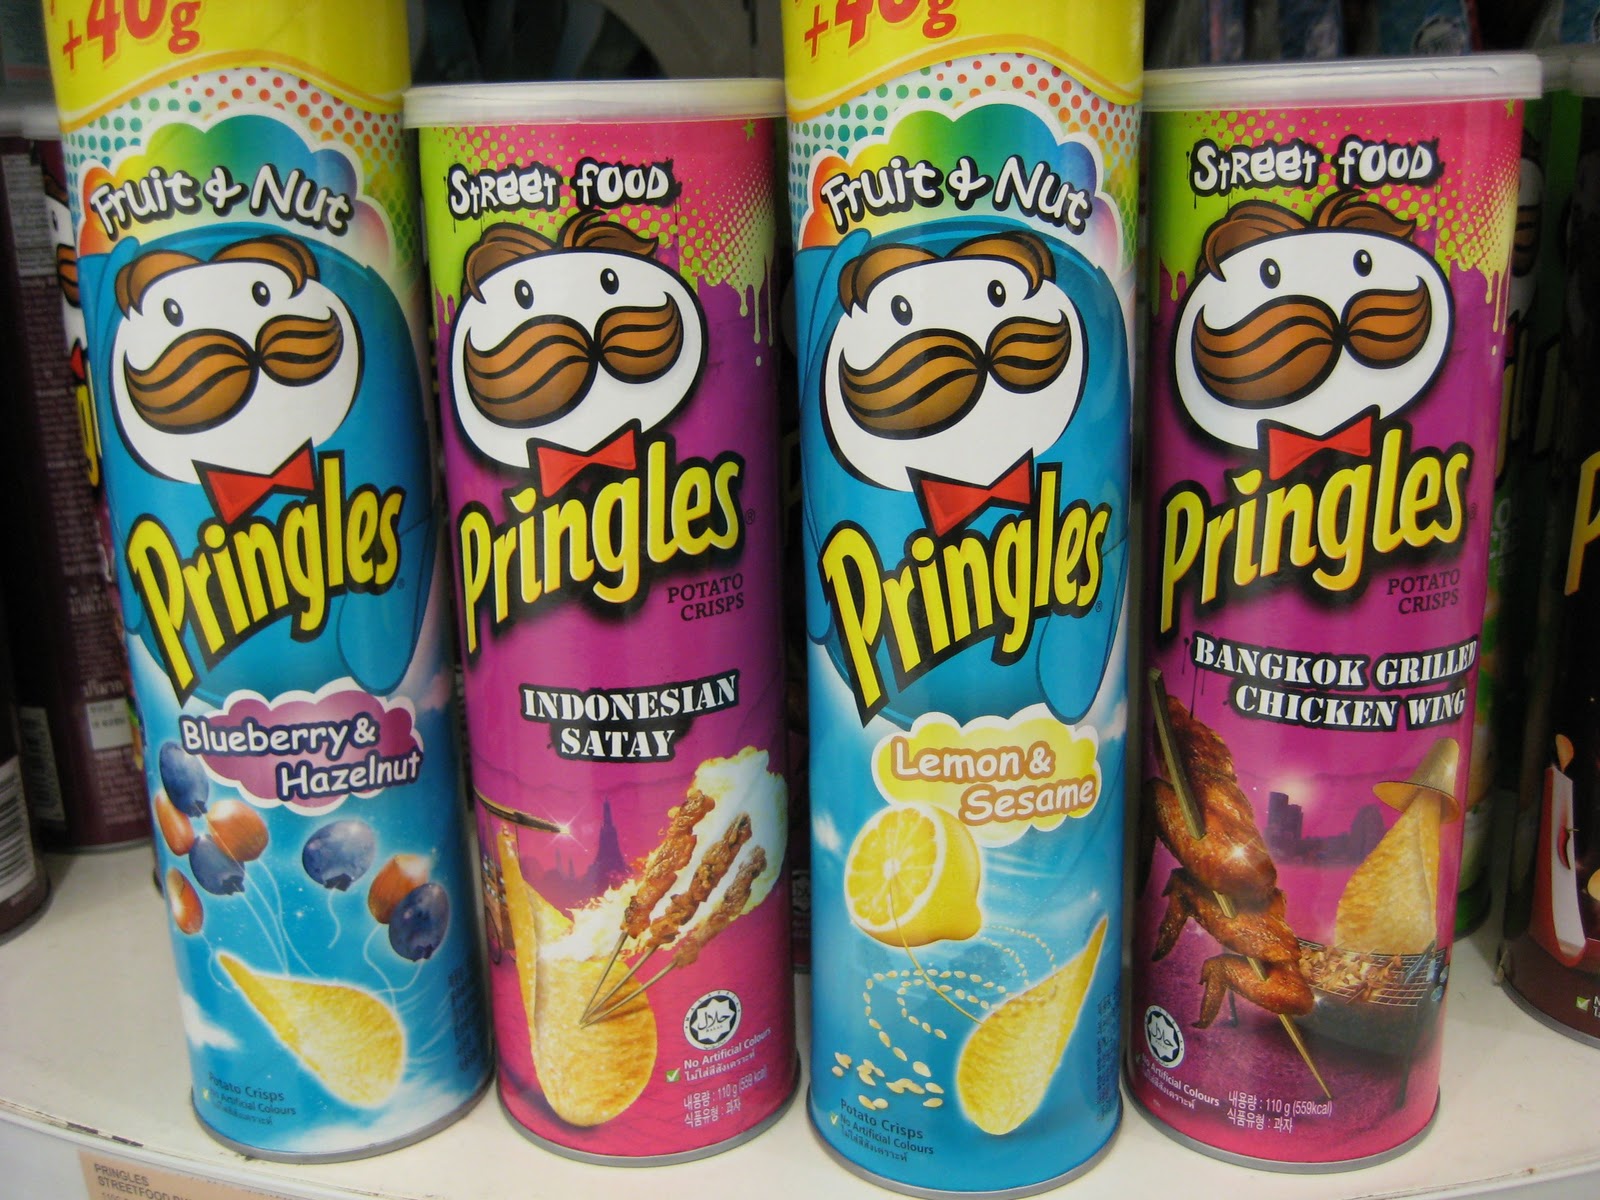 Where Are Pringles From